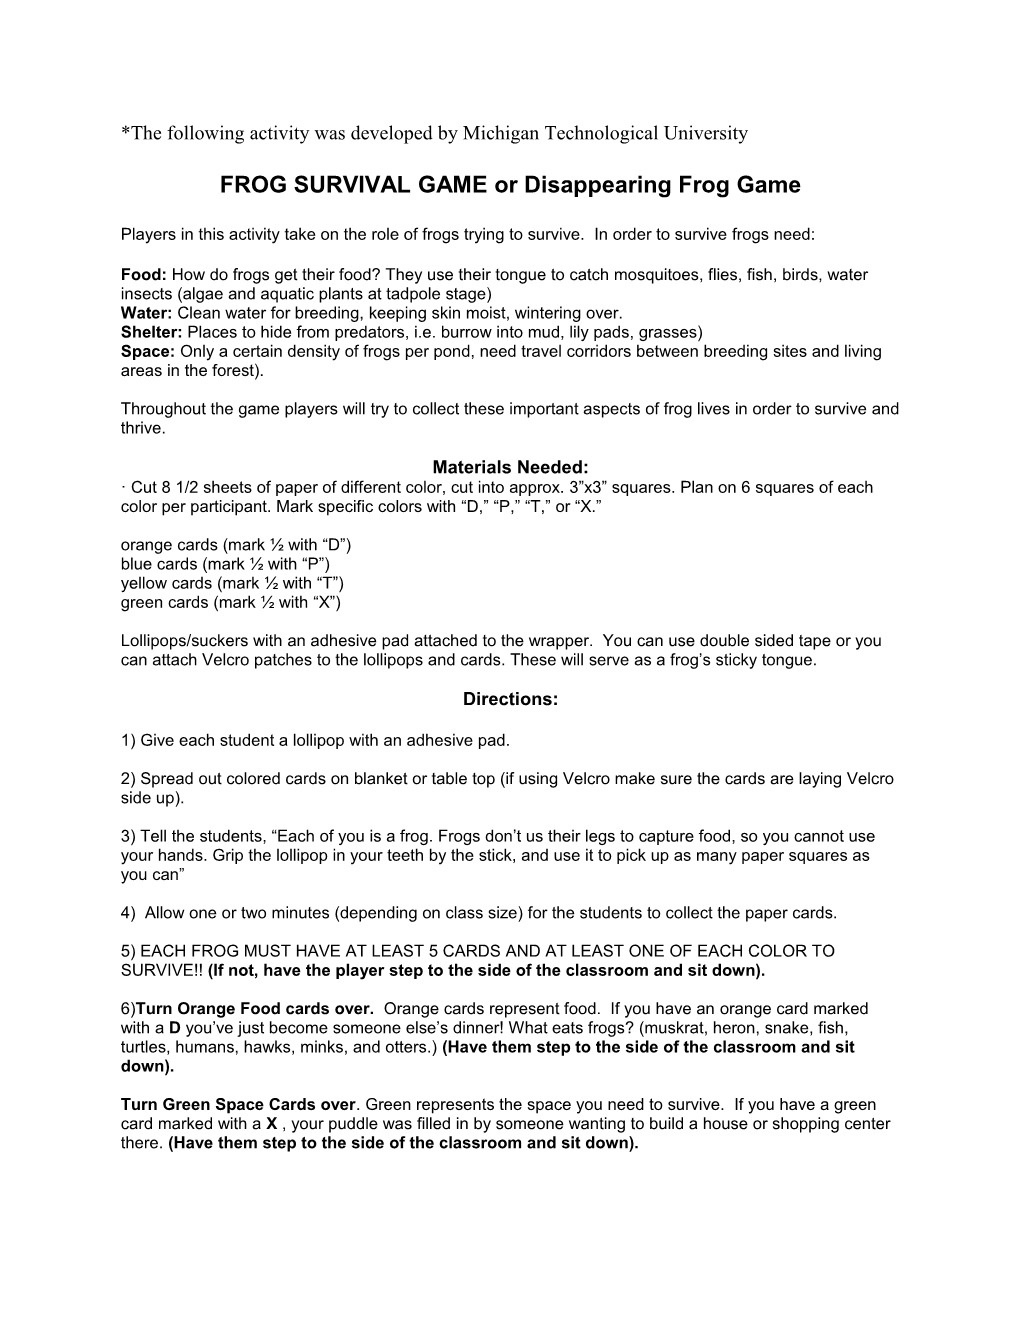 FROG SURVIVAL GAME Or Disappearing Frog Game